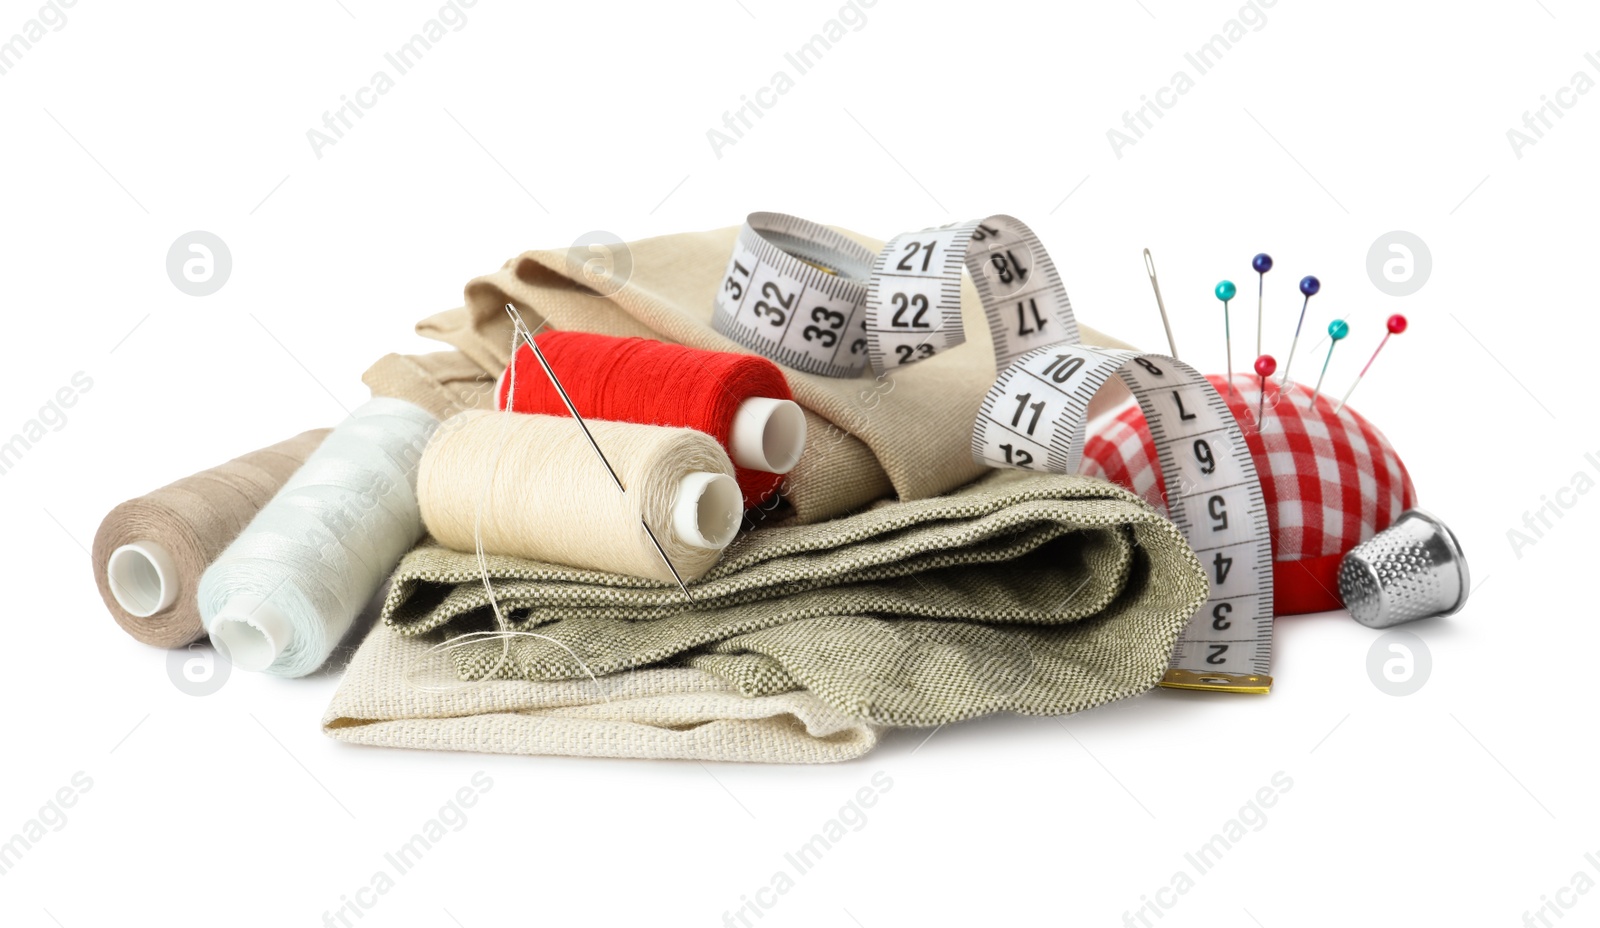 Photo of Spools of threads and sewing tools on white background